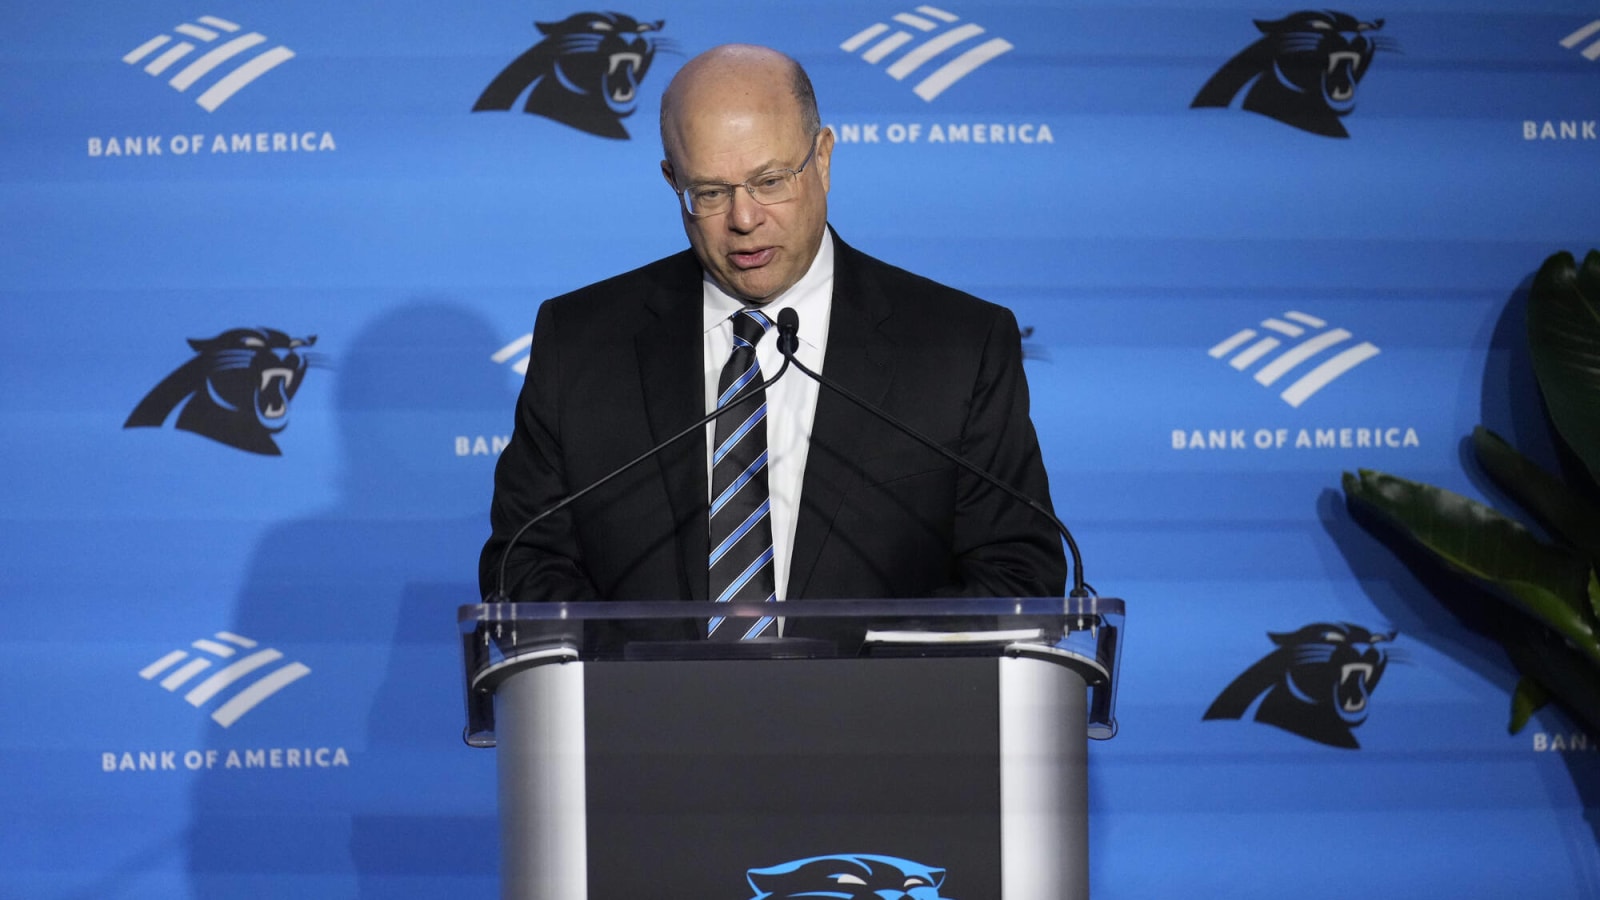 'That’s how you lose a fan base': Cam Newton cautions Panthers owner David Tepper to learn to take criticism from fans better